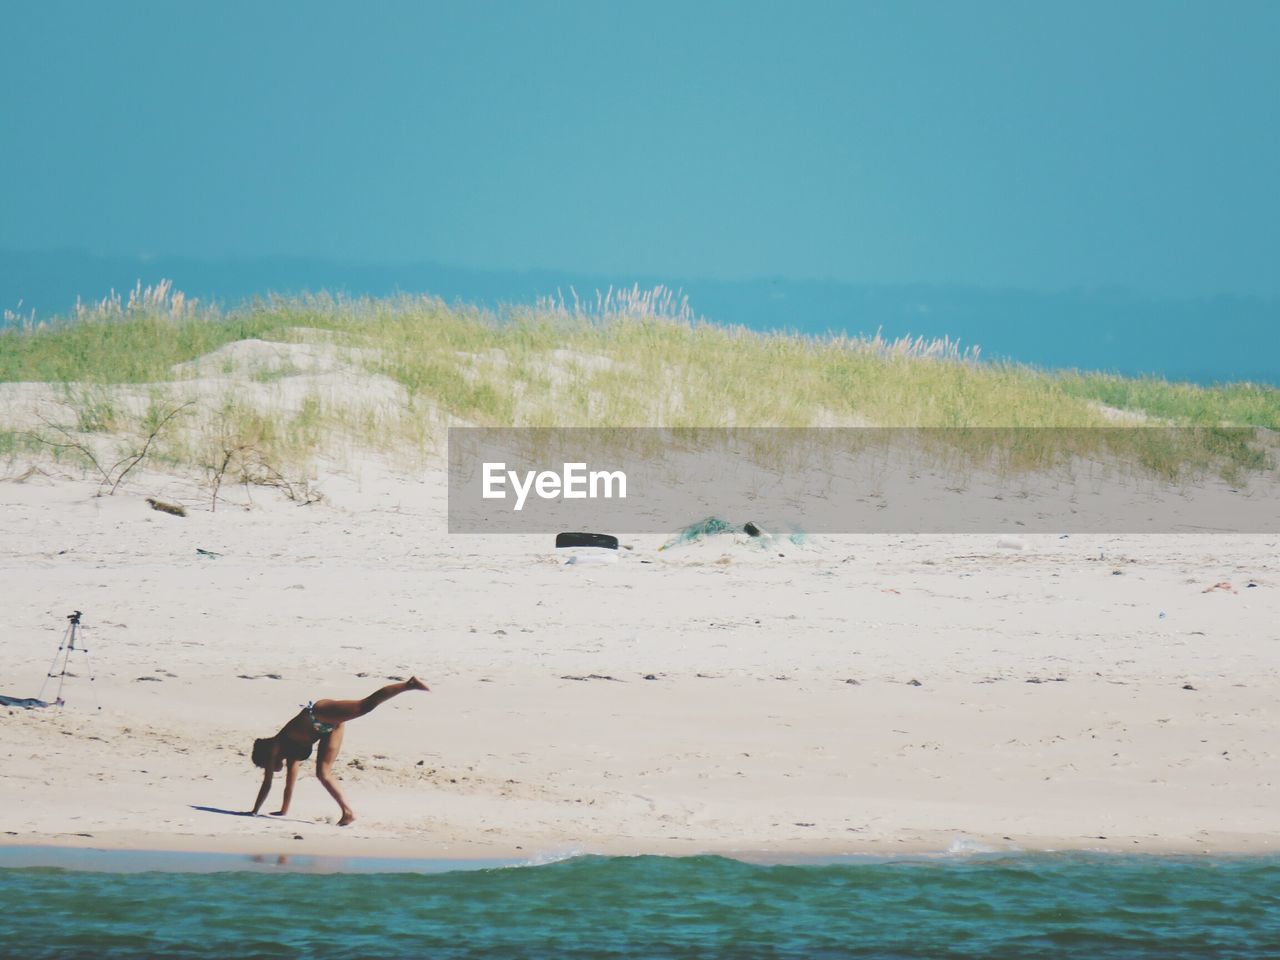 Mid distance view of playful woman practicing cartwheel at beach